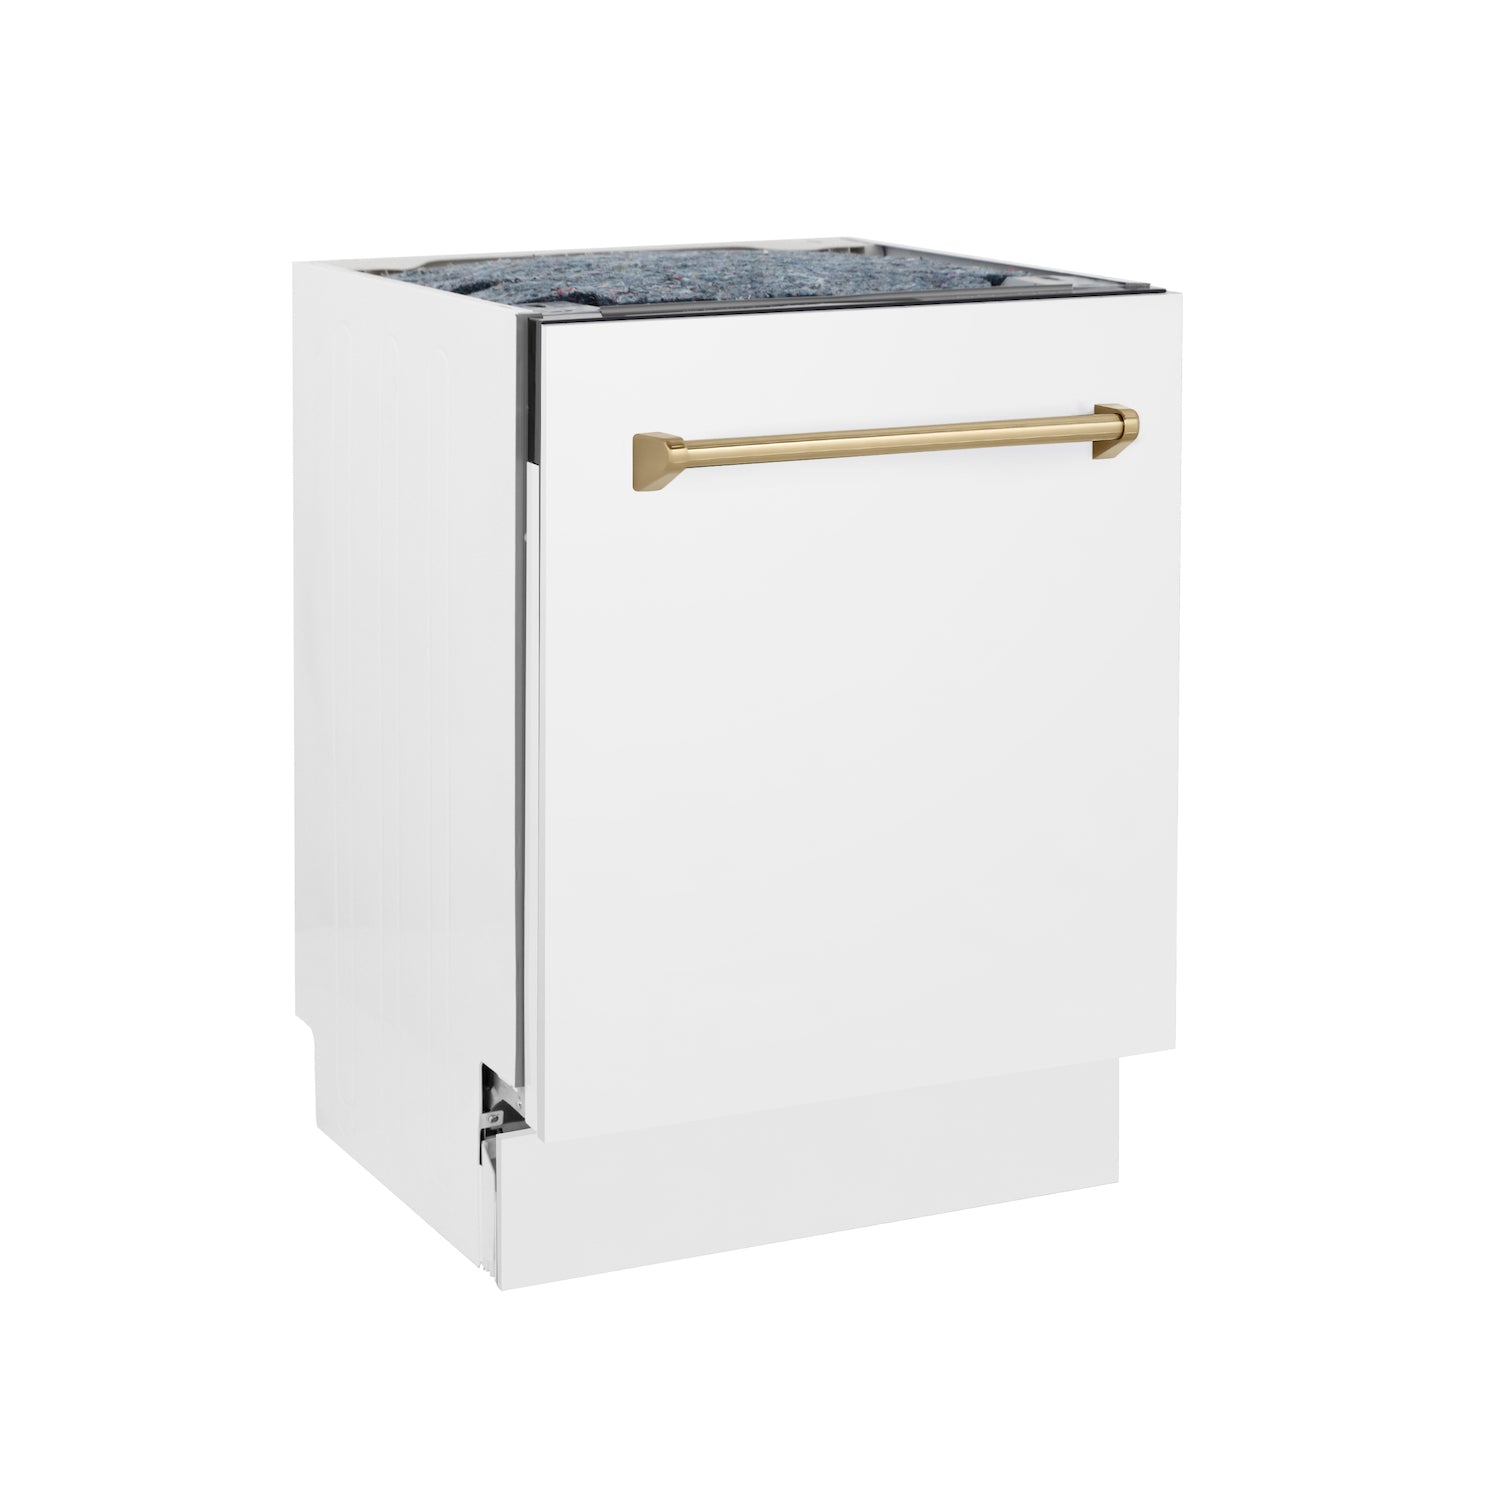 ZLINE Autograph Edition 24 in. 3rd Rack Top Control Tall Tub Dishwasher in White Matte with Champagne Bronze Accent Handle, 51dBa (DWVZ-WM-24-CB)